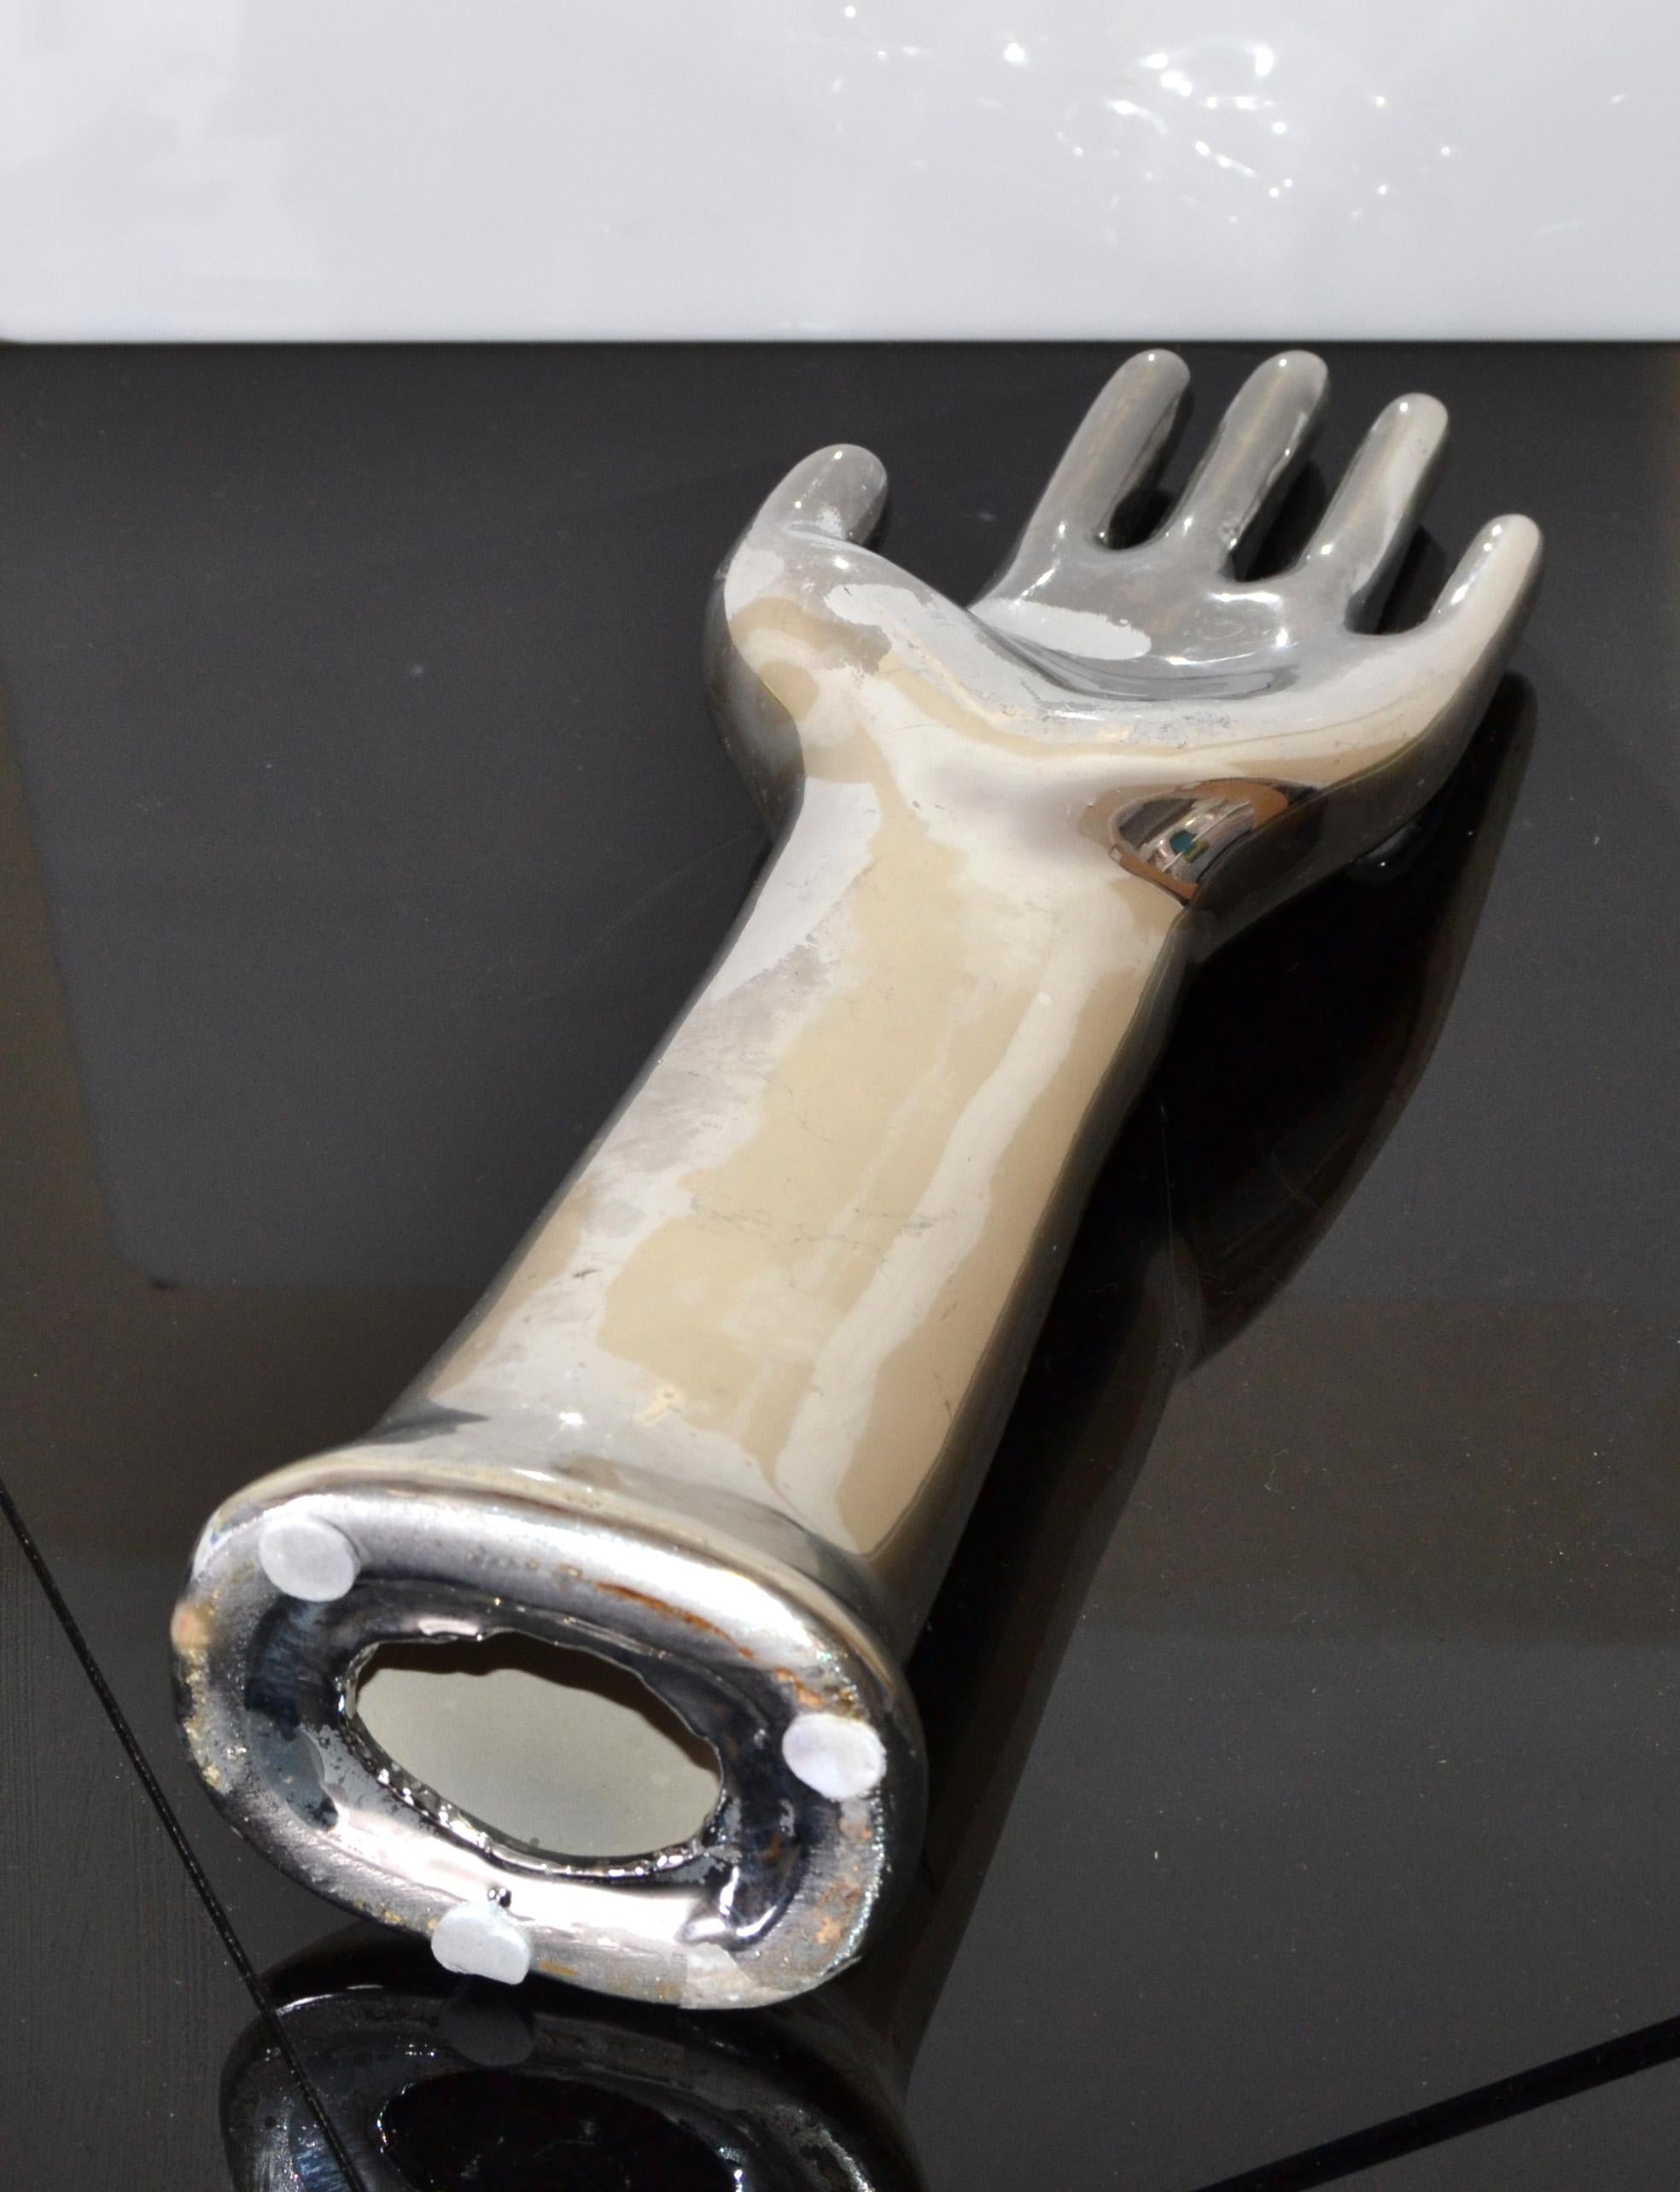 Vintage Porcelain Hand Glove Mold Nickel Plated Jewelry Stand Sculpture 1970s For Sale 2